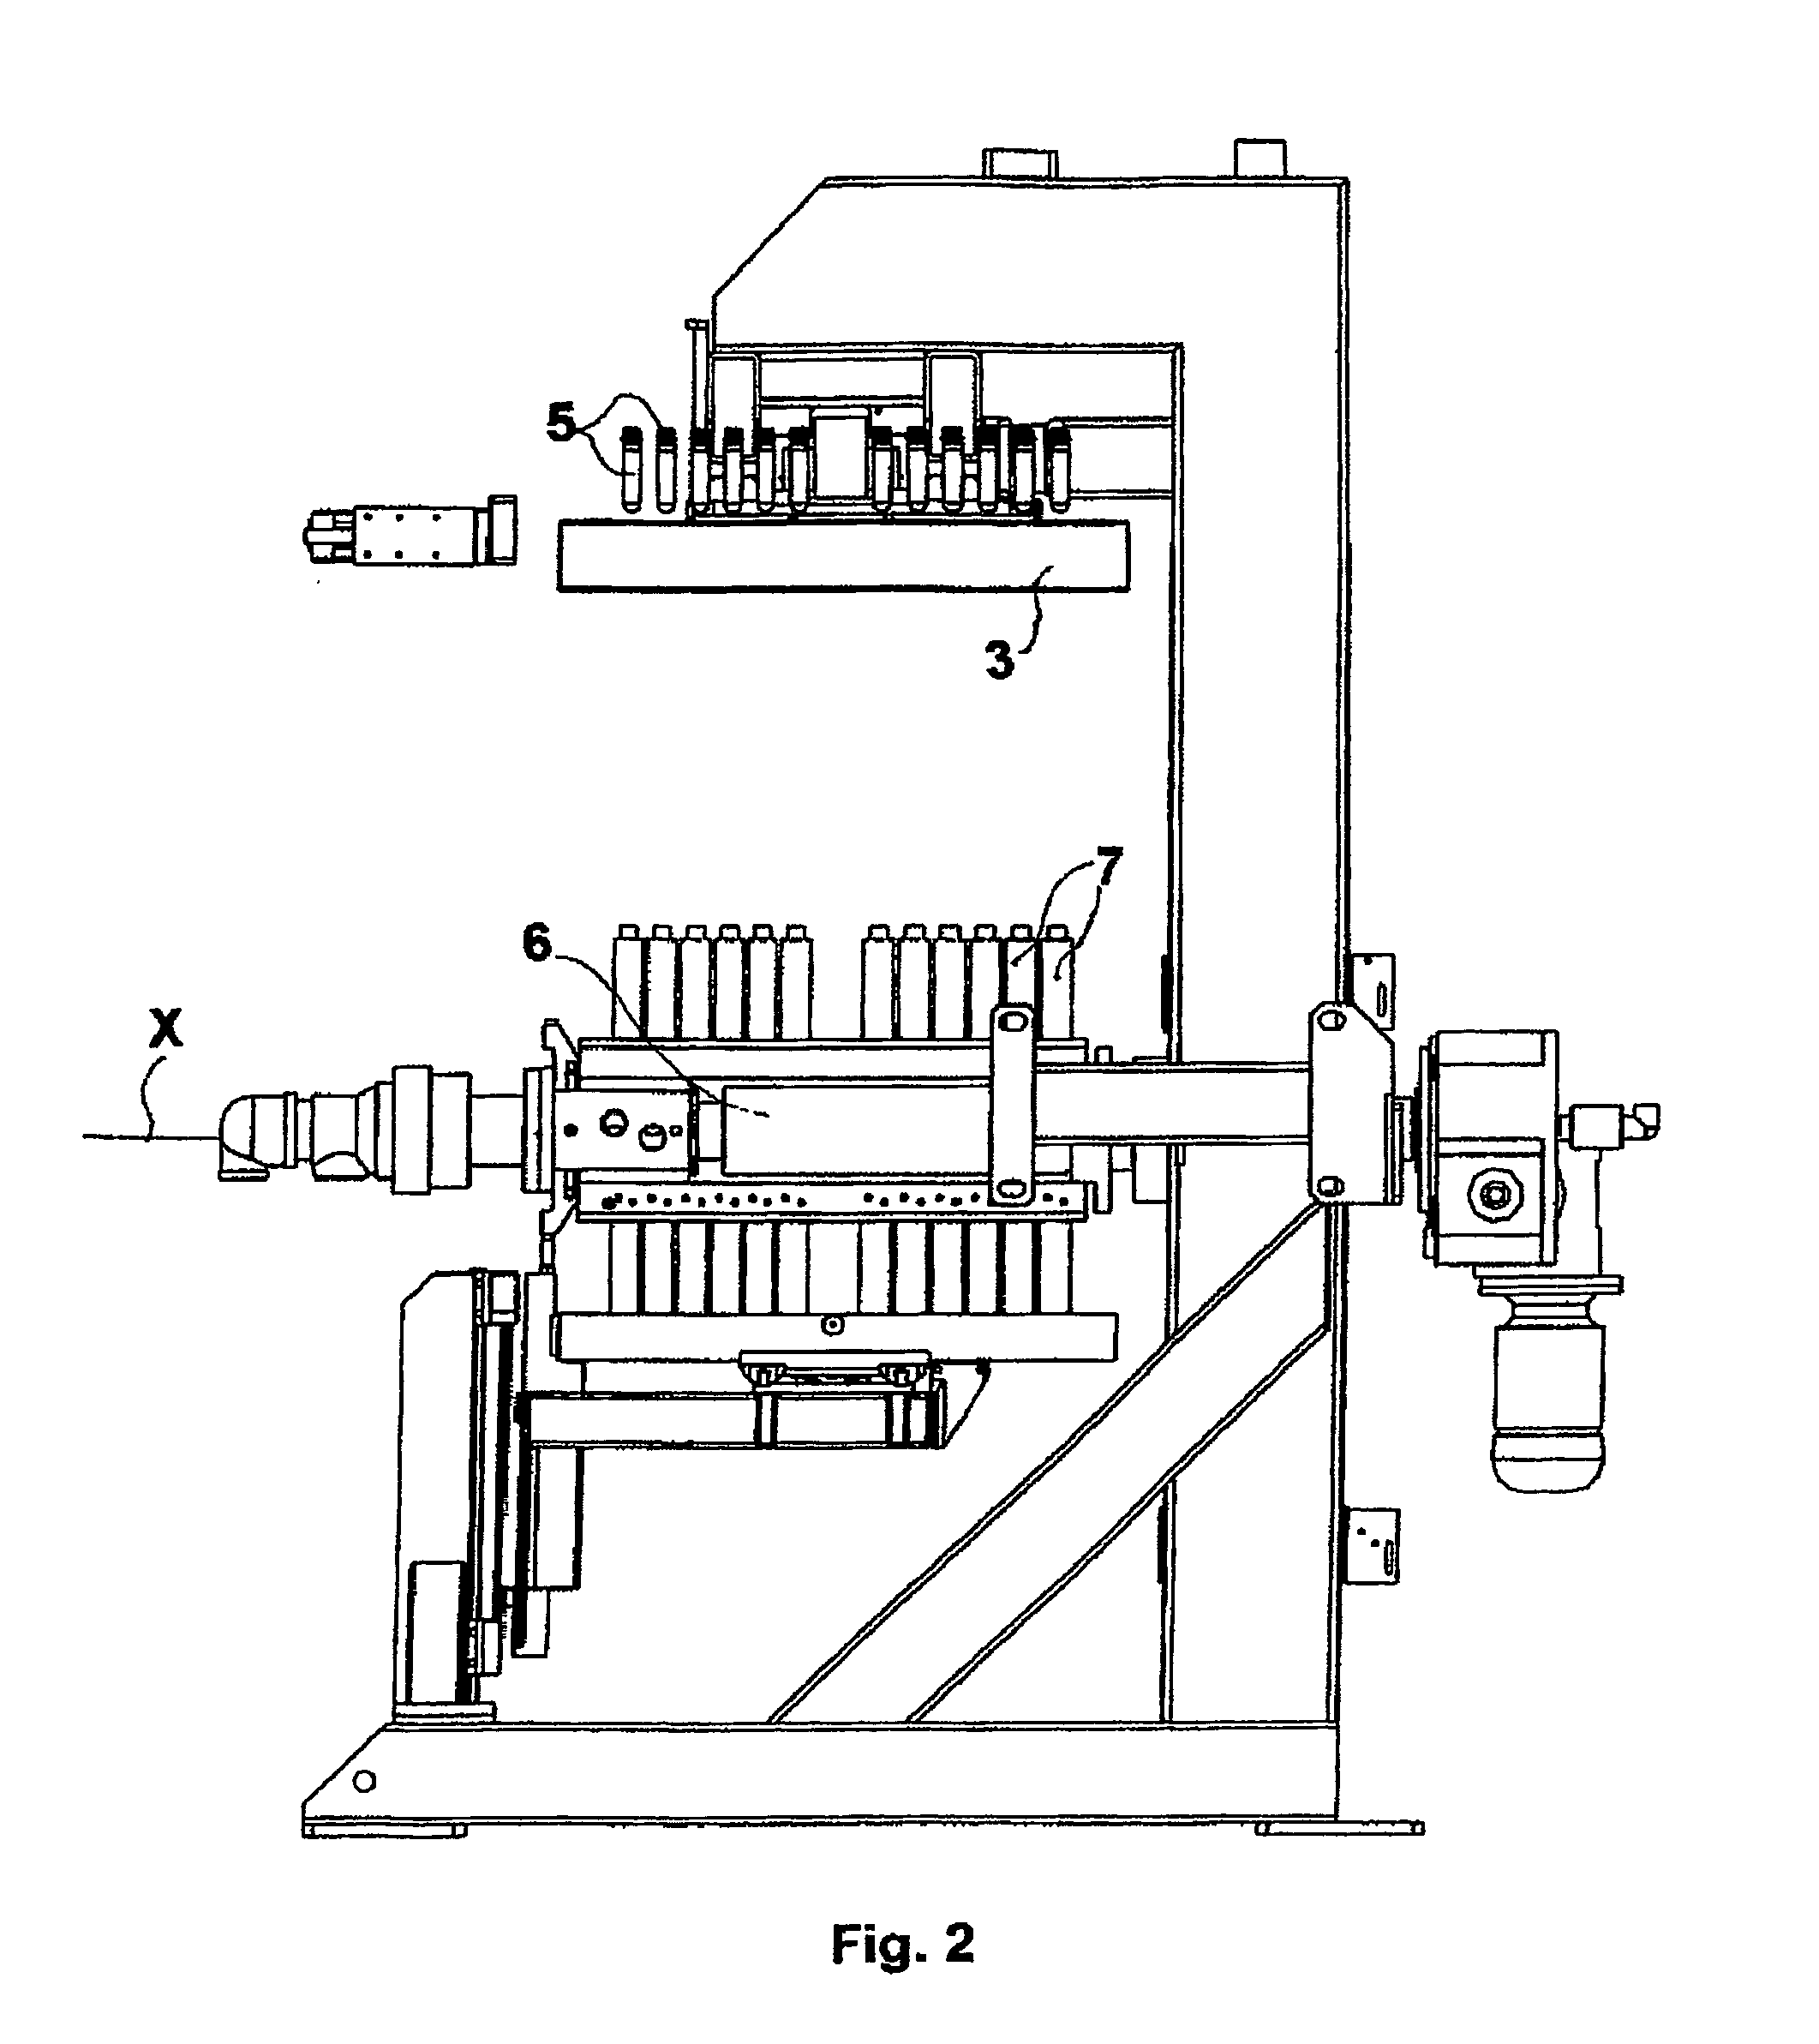 Device and process for extracting plastic items